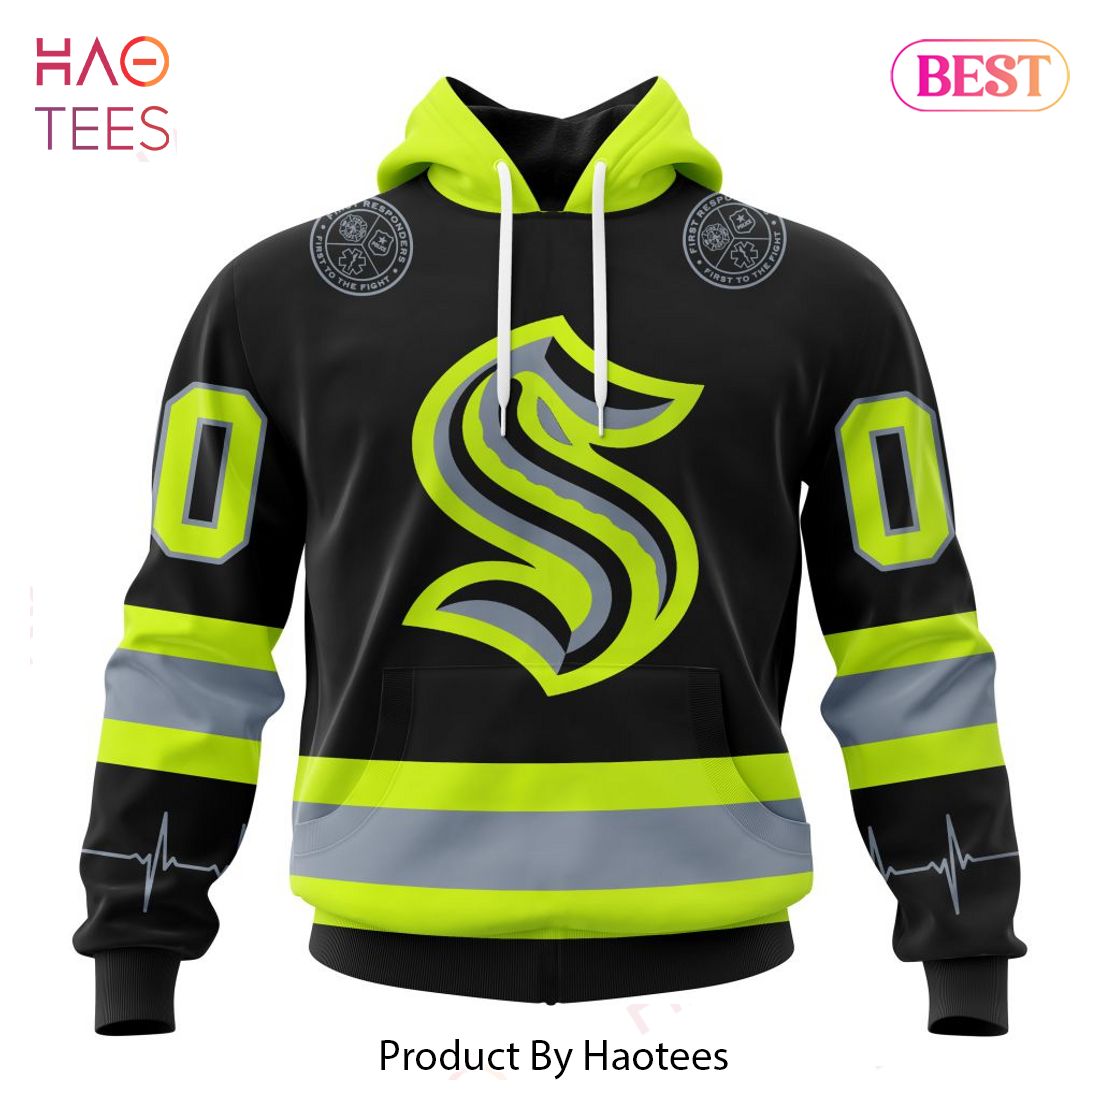 BEST NHL Seattle Kraken Specialized Unisex Kits With FireFighter Uniforms  Color 3D Hoodie